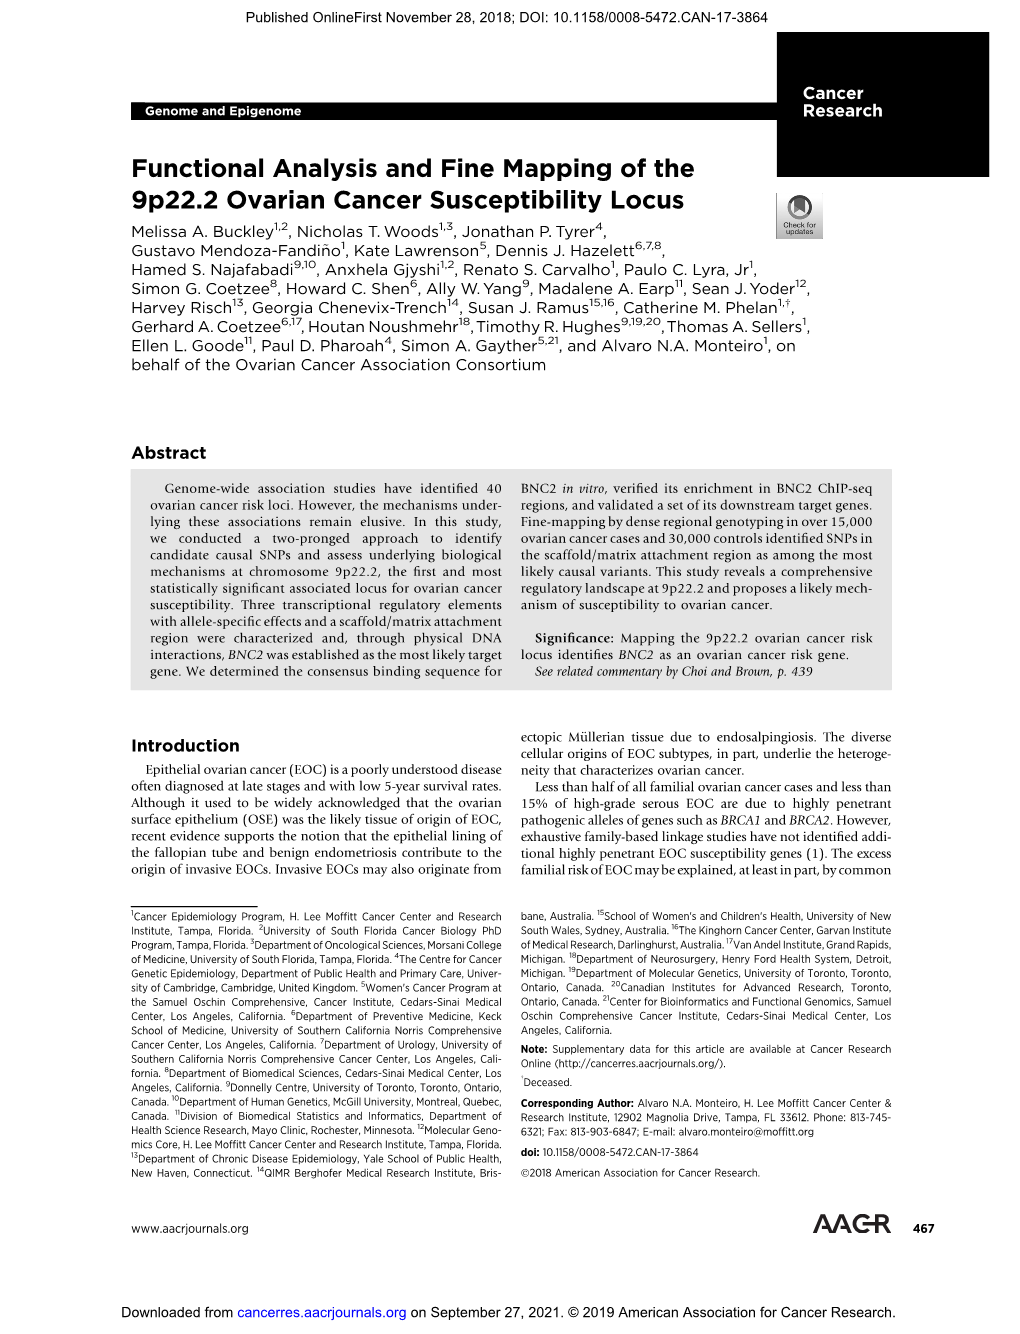 Functional Analysis and Fine Mapping of the 9P22.2 Ovarian Cancer Susceptibility Locus Melissa A